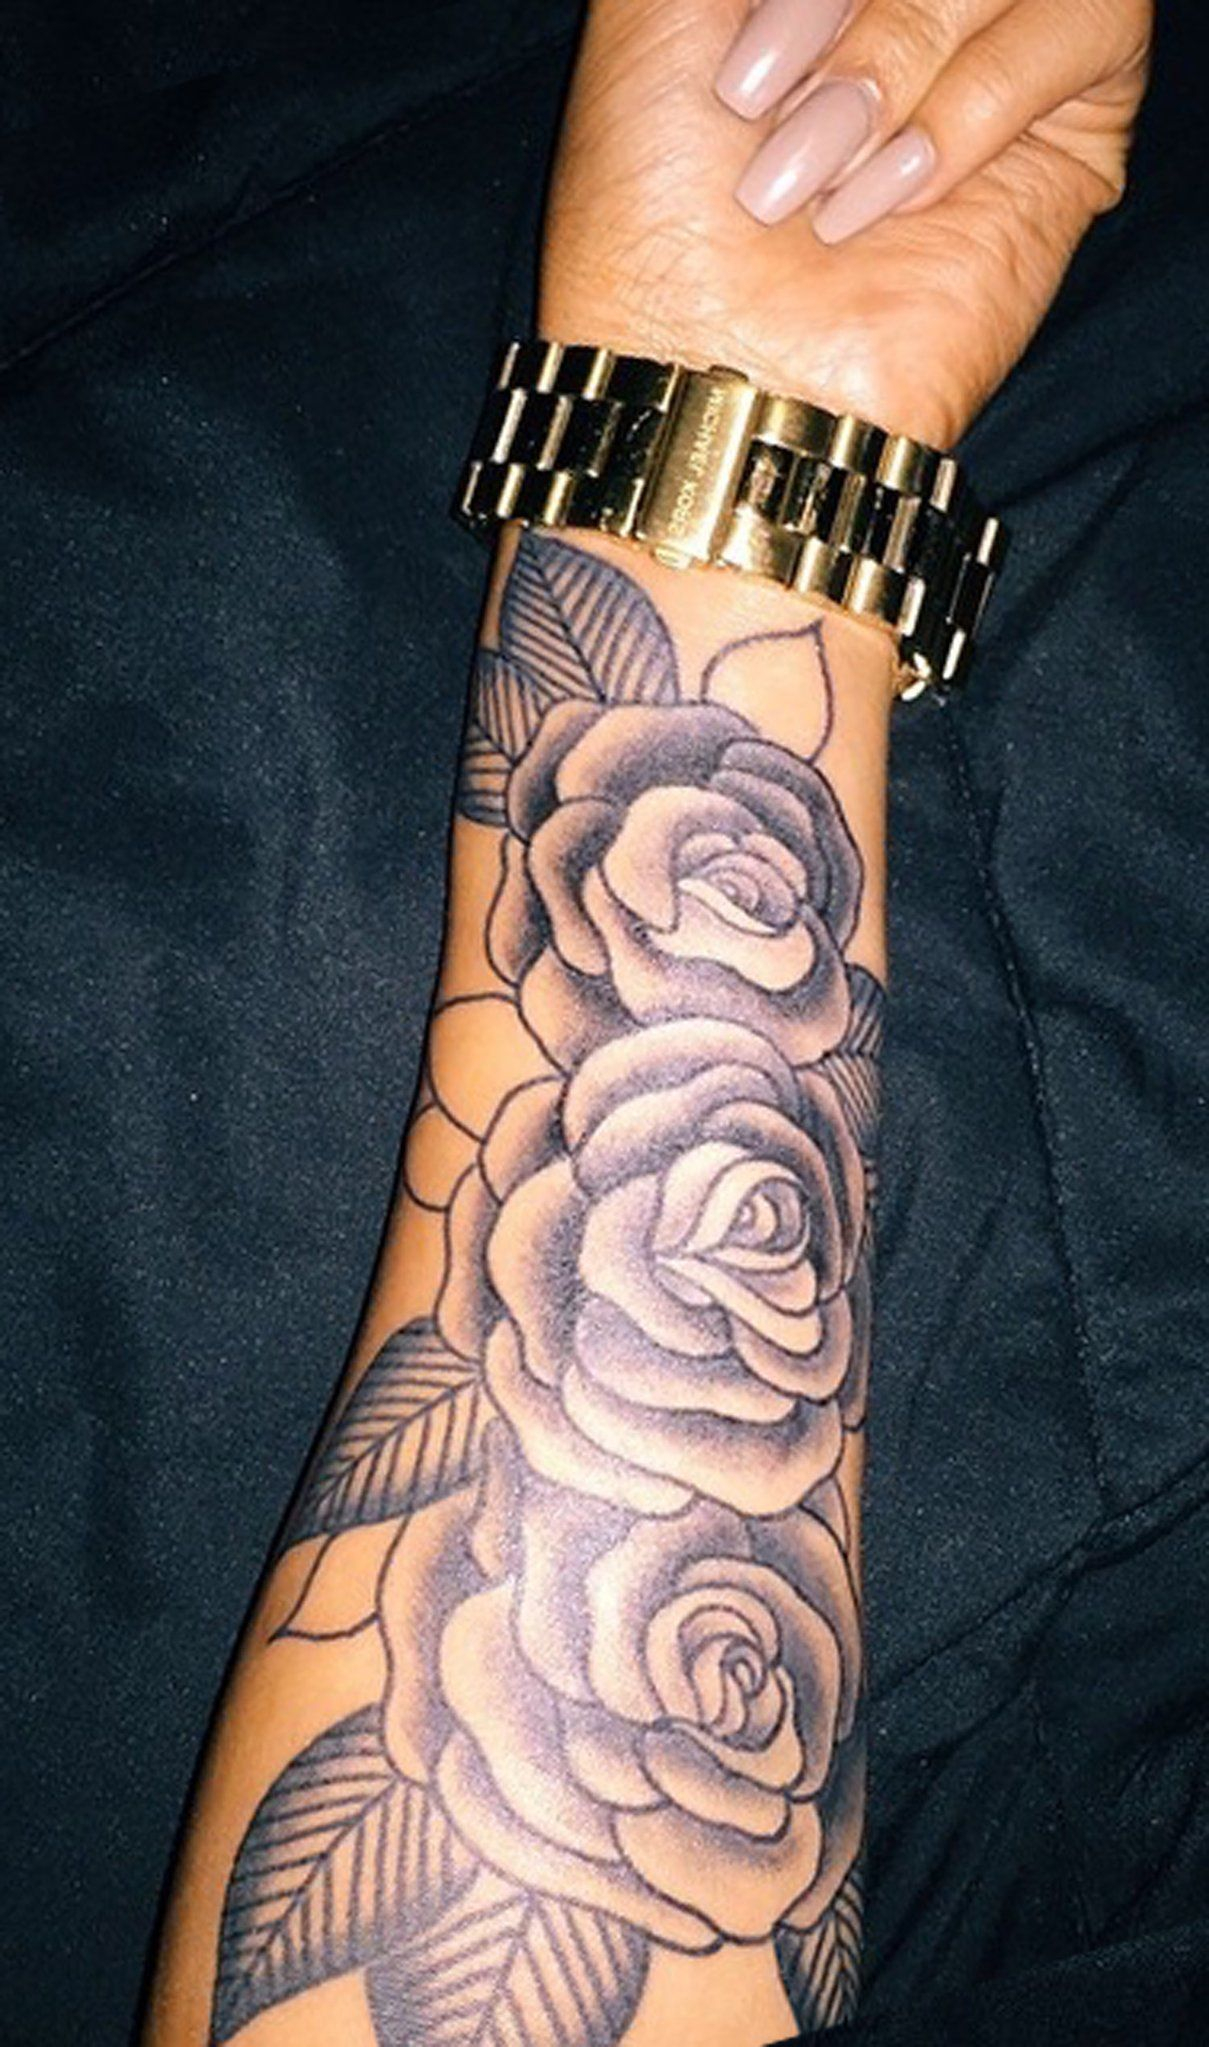 Realistic Vintage Rose Forearm Tattoo Ideas For Women Black Floral in size 1209 X 2047